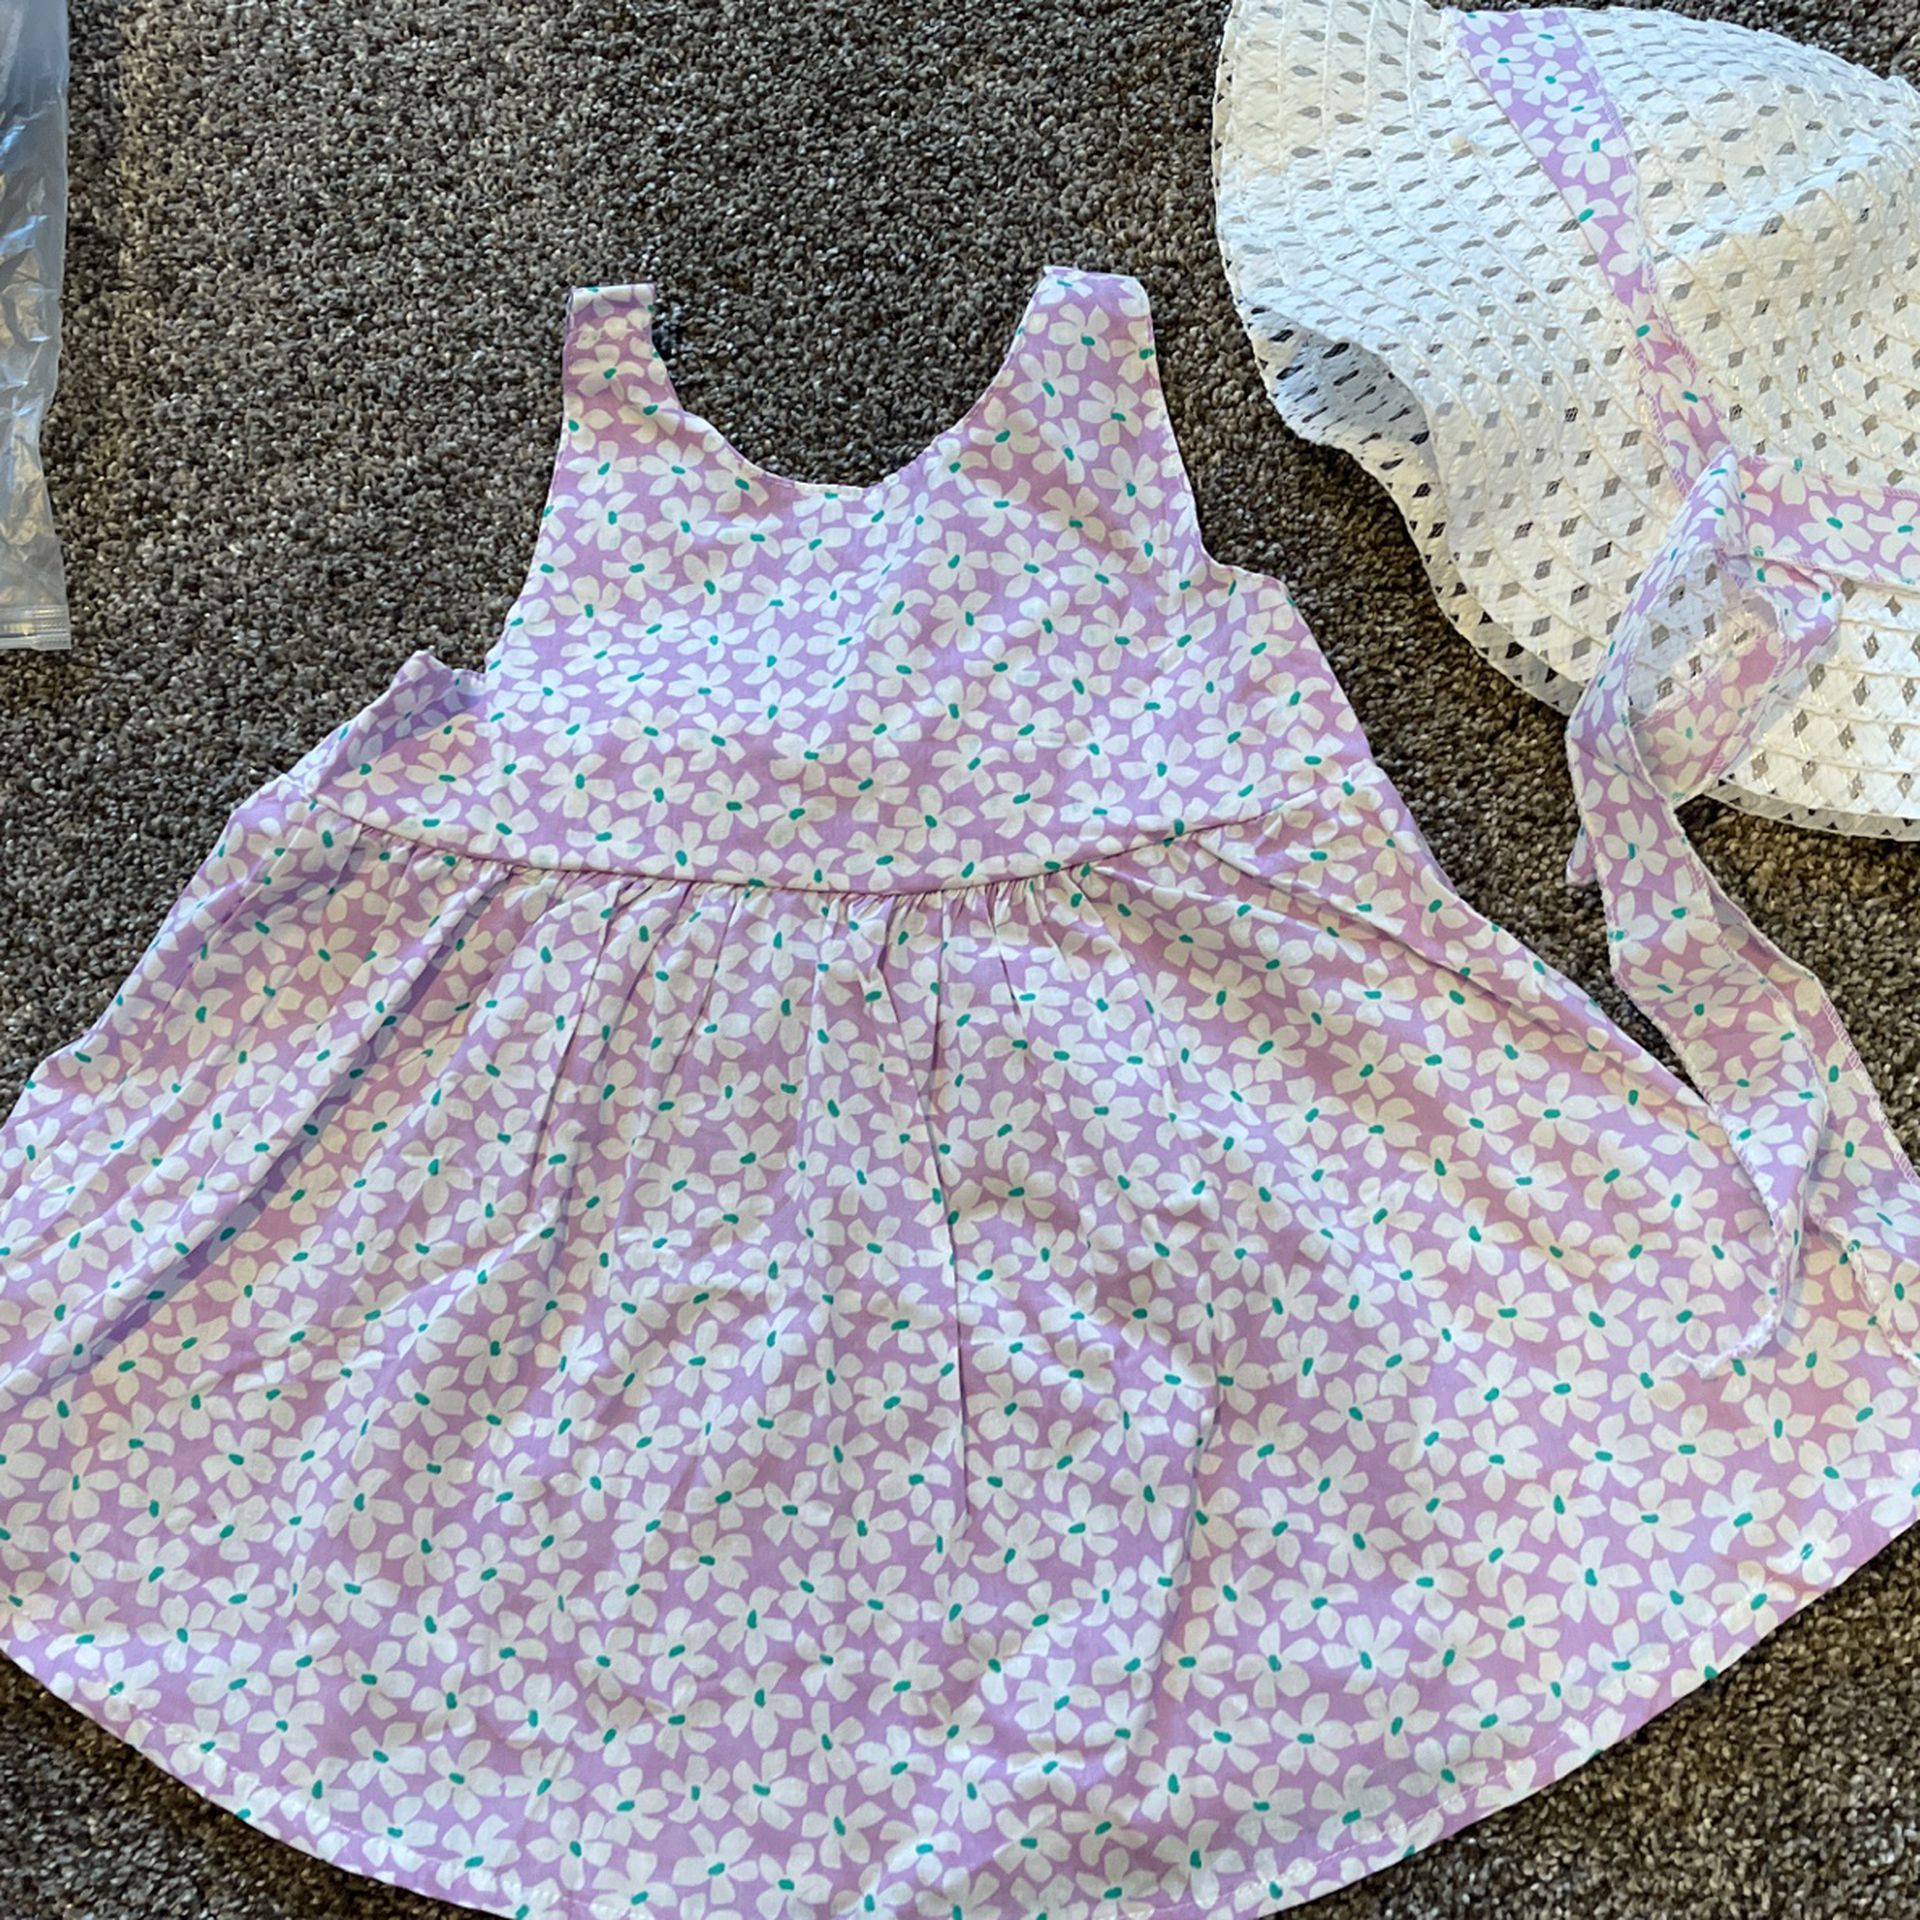 3 Pc Girls Dress And Hat SZE 9 Mos, New In Bag